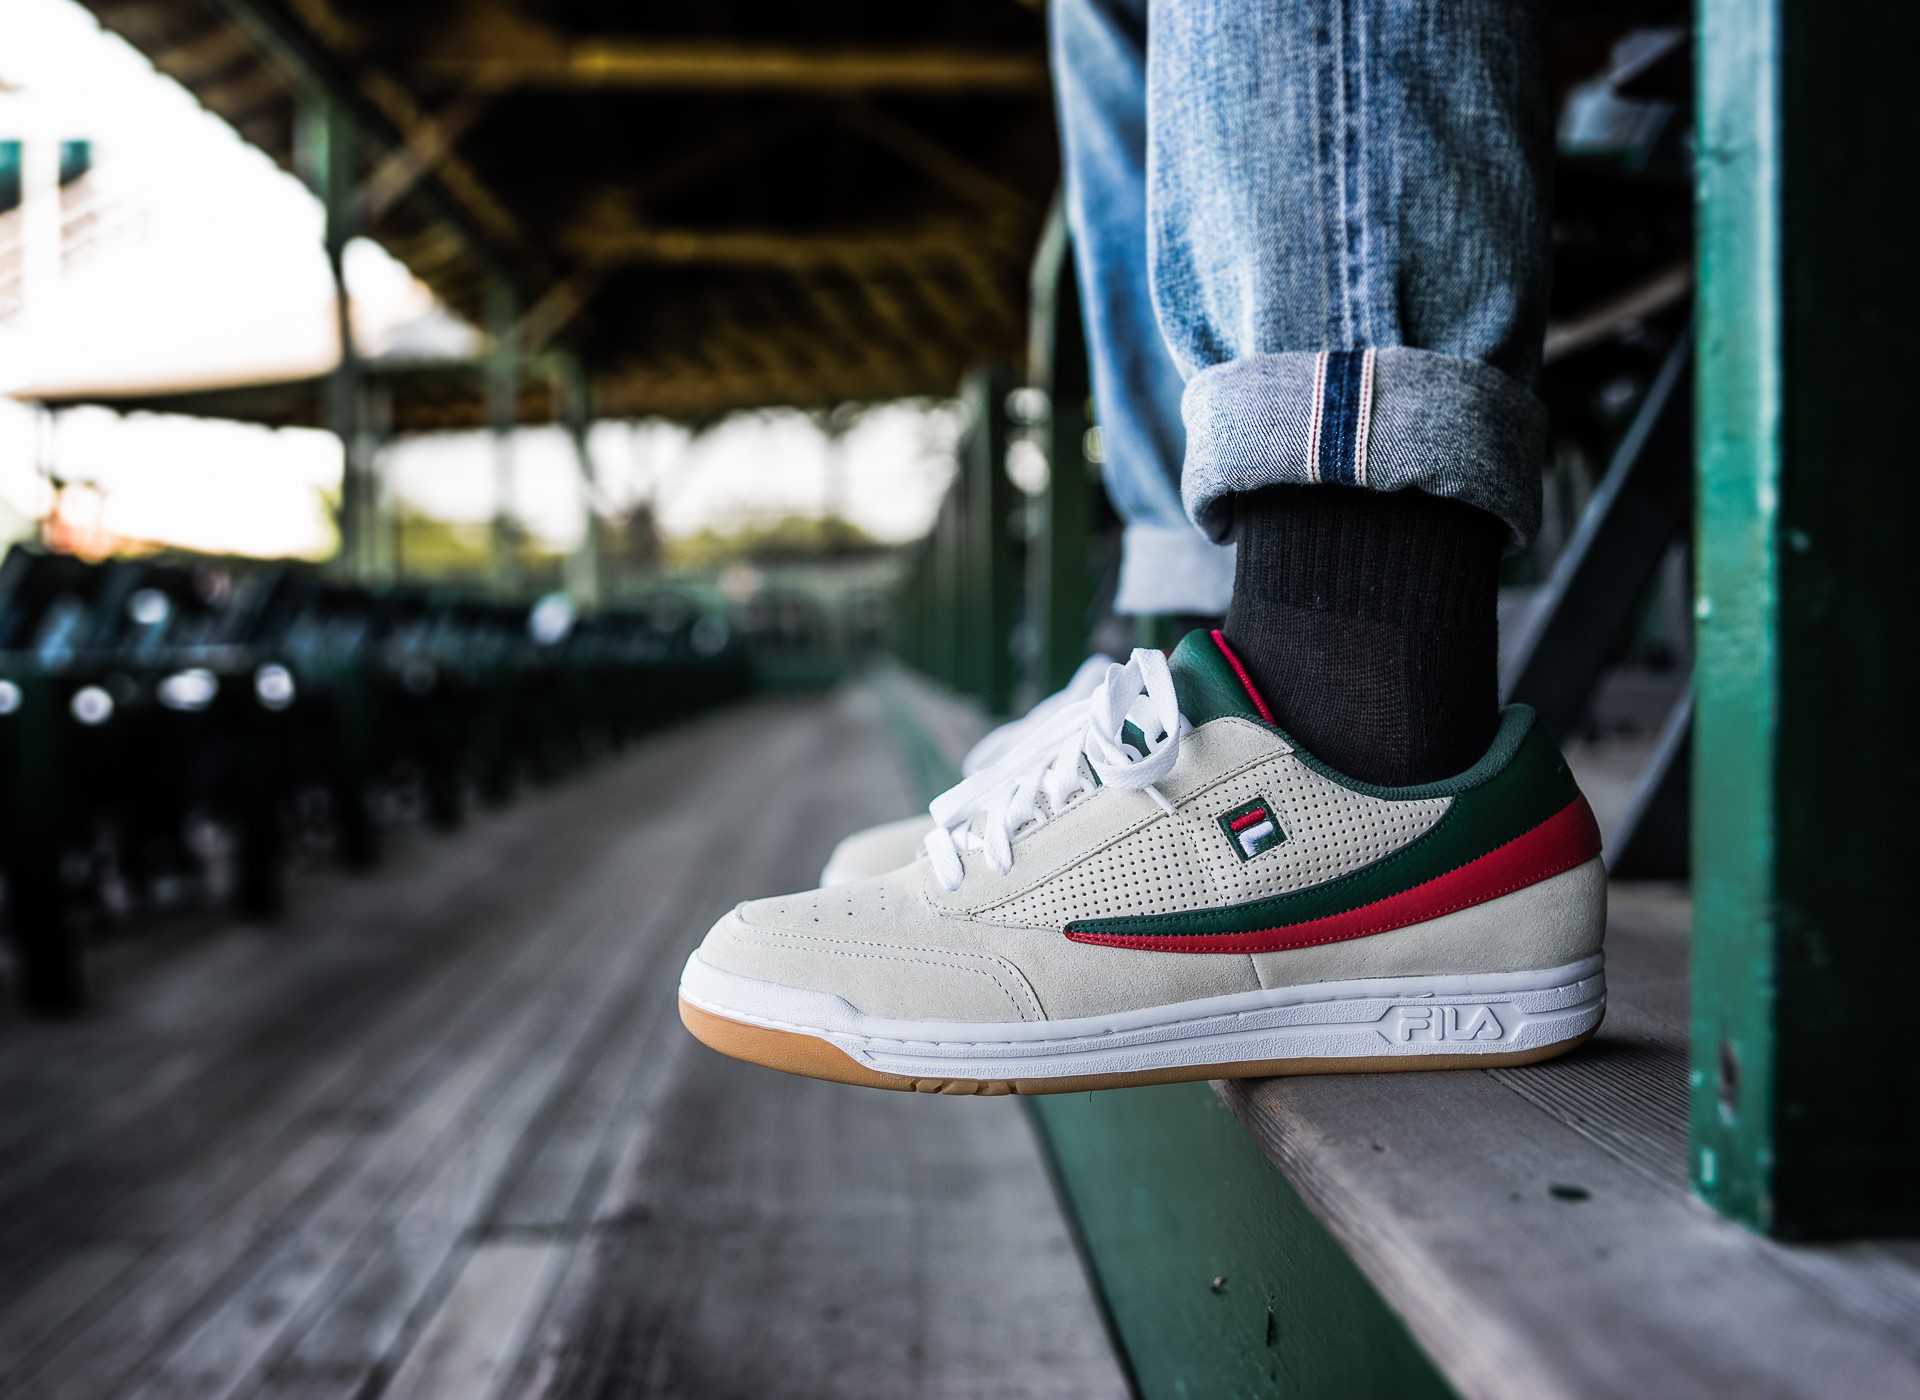 venstre interval Paranafloden FILA and Packer Shoes Kick Off Limited-Edition Sneaker Collaboration with  the International Tennis Hall of Fame